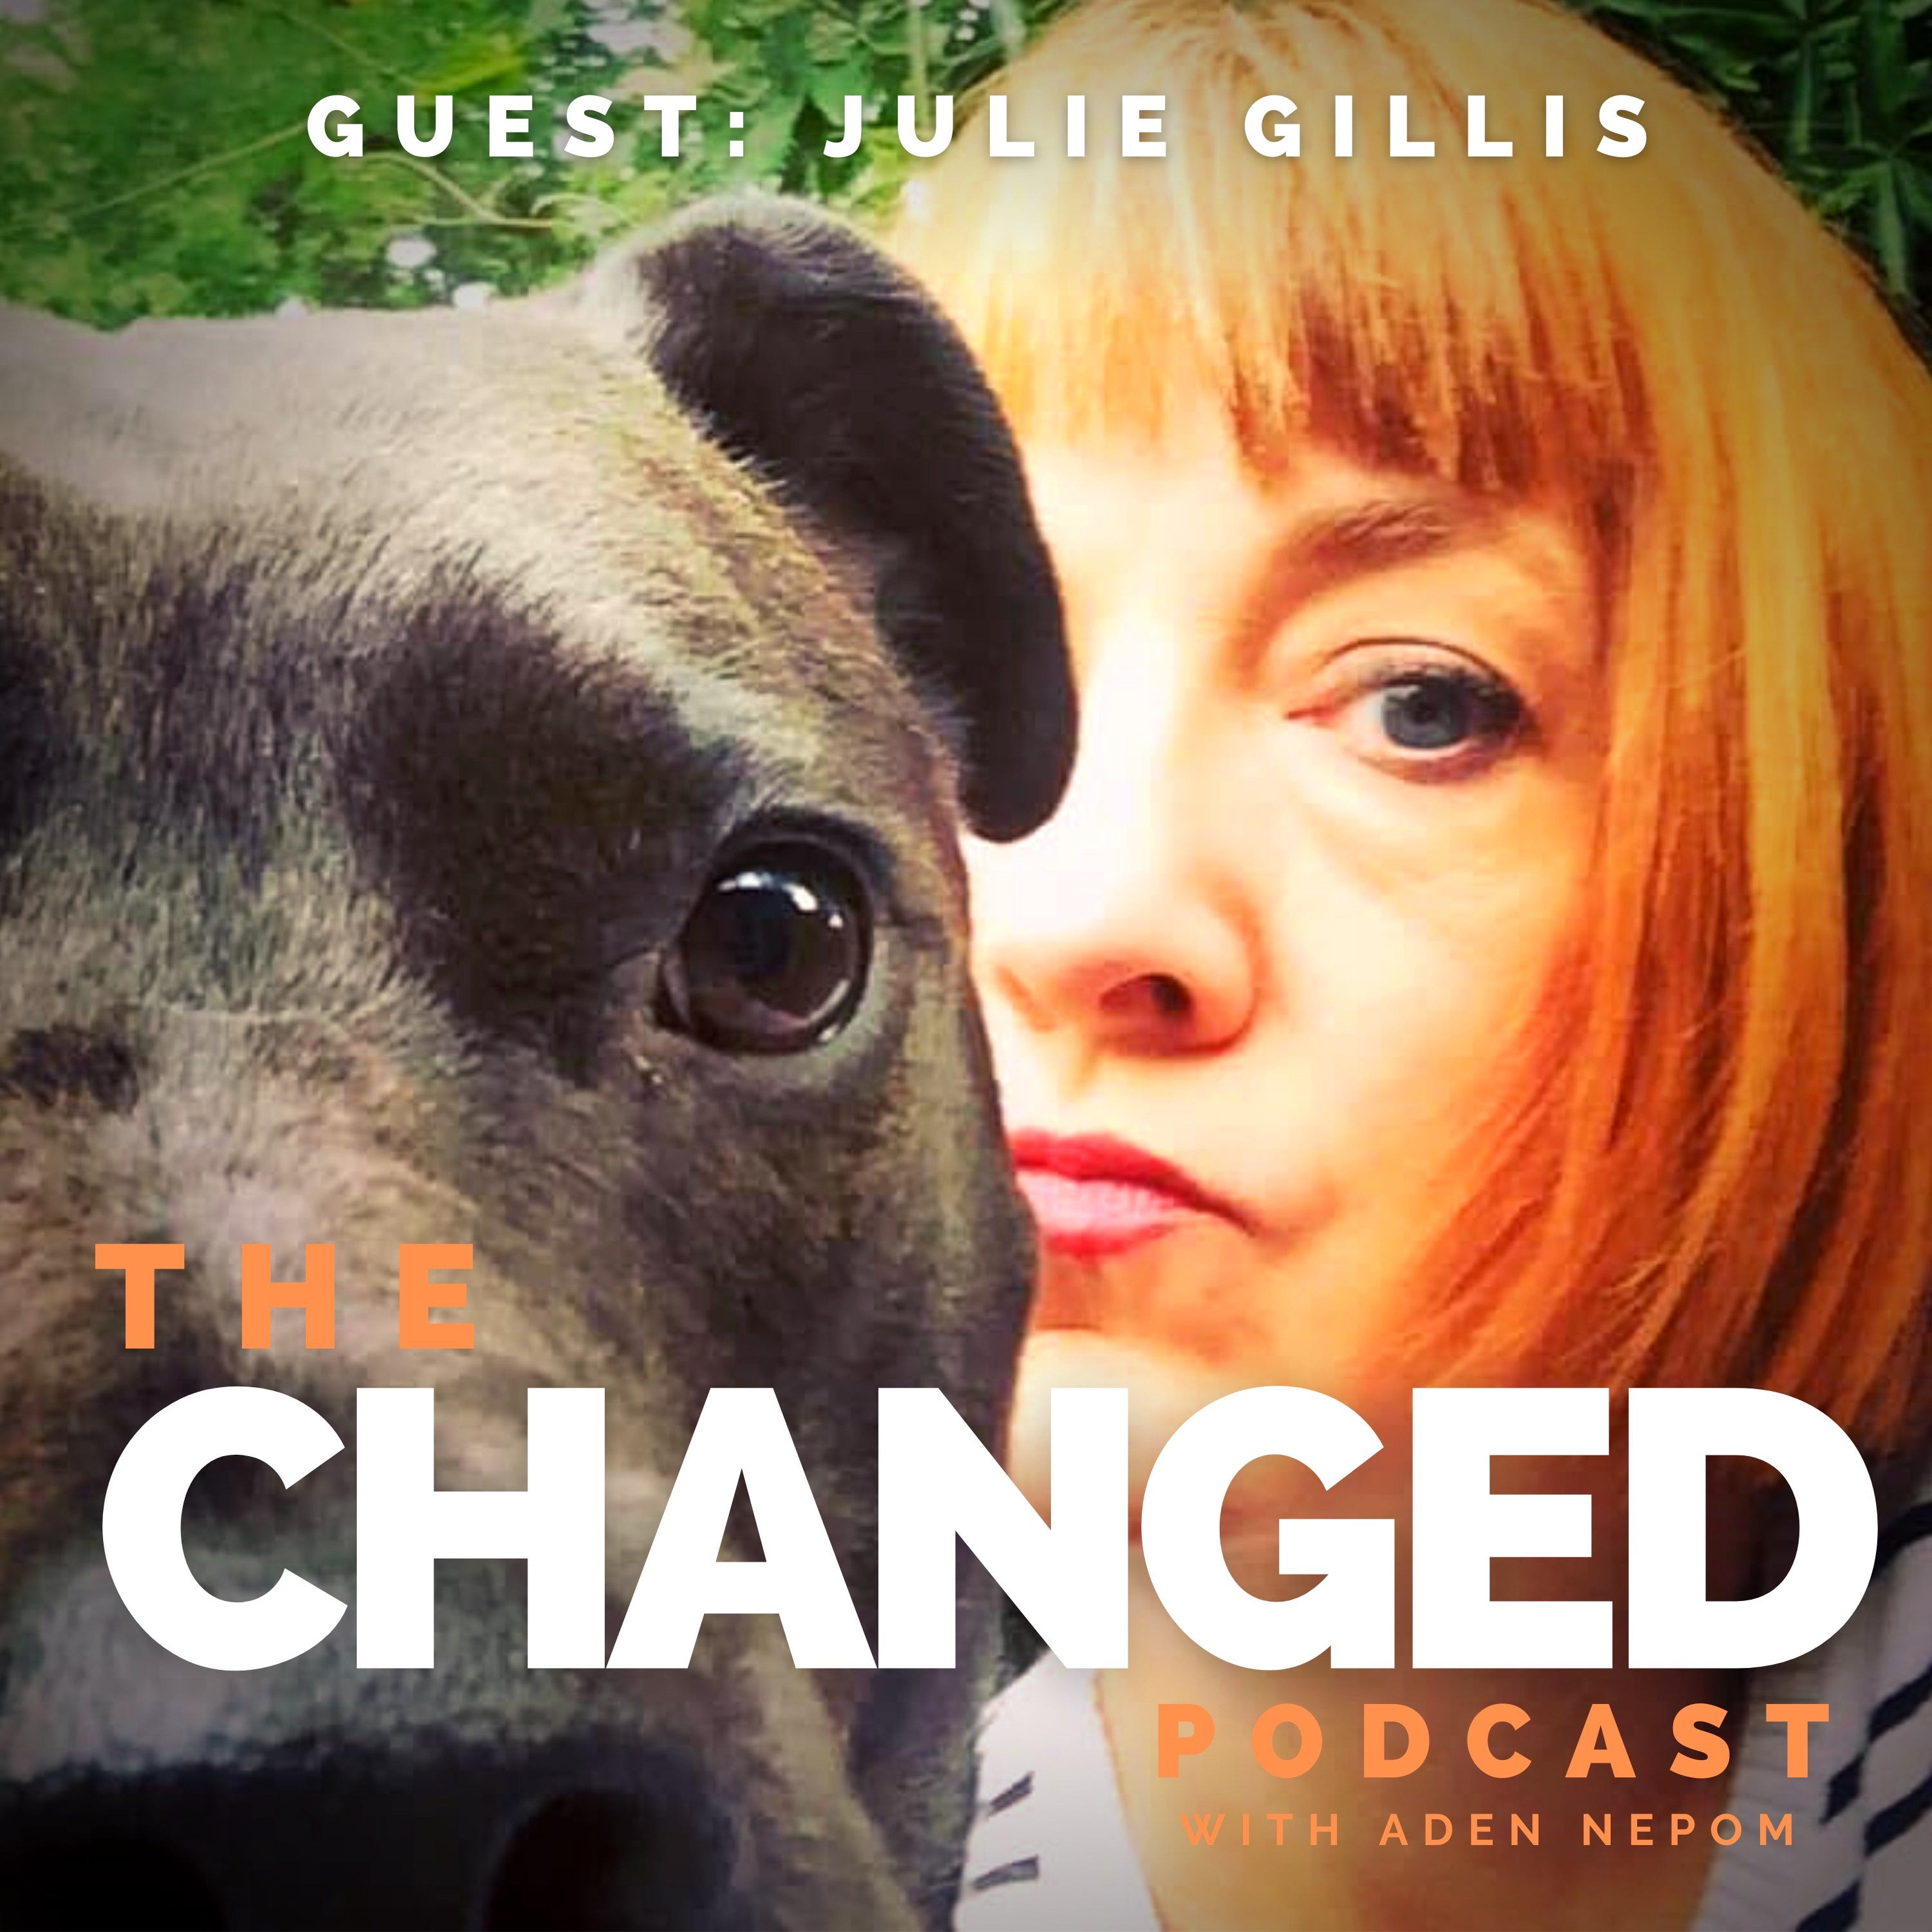 Might You Be As Julie Gillis Suggests, a Supporting Character in Someone Else’s Story? Episode 40